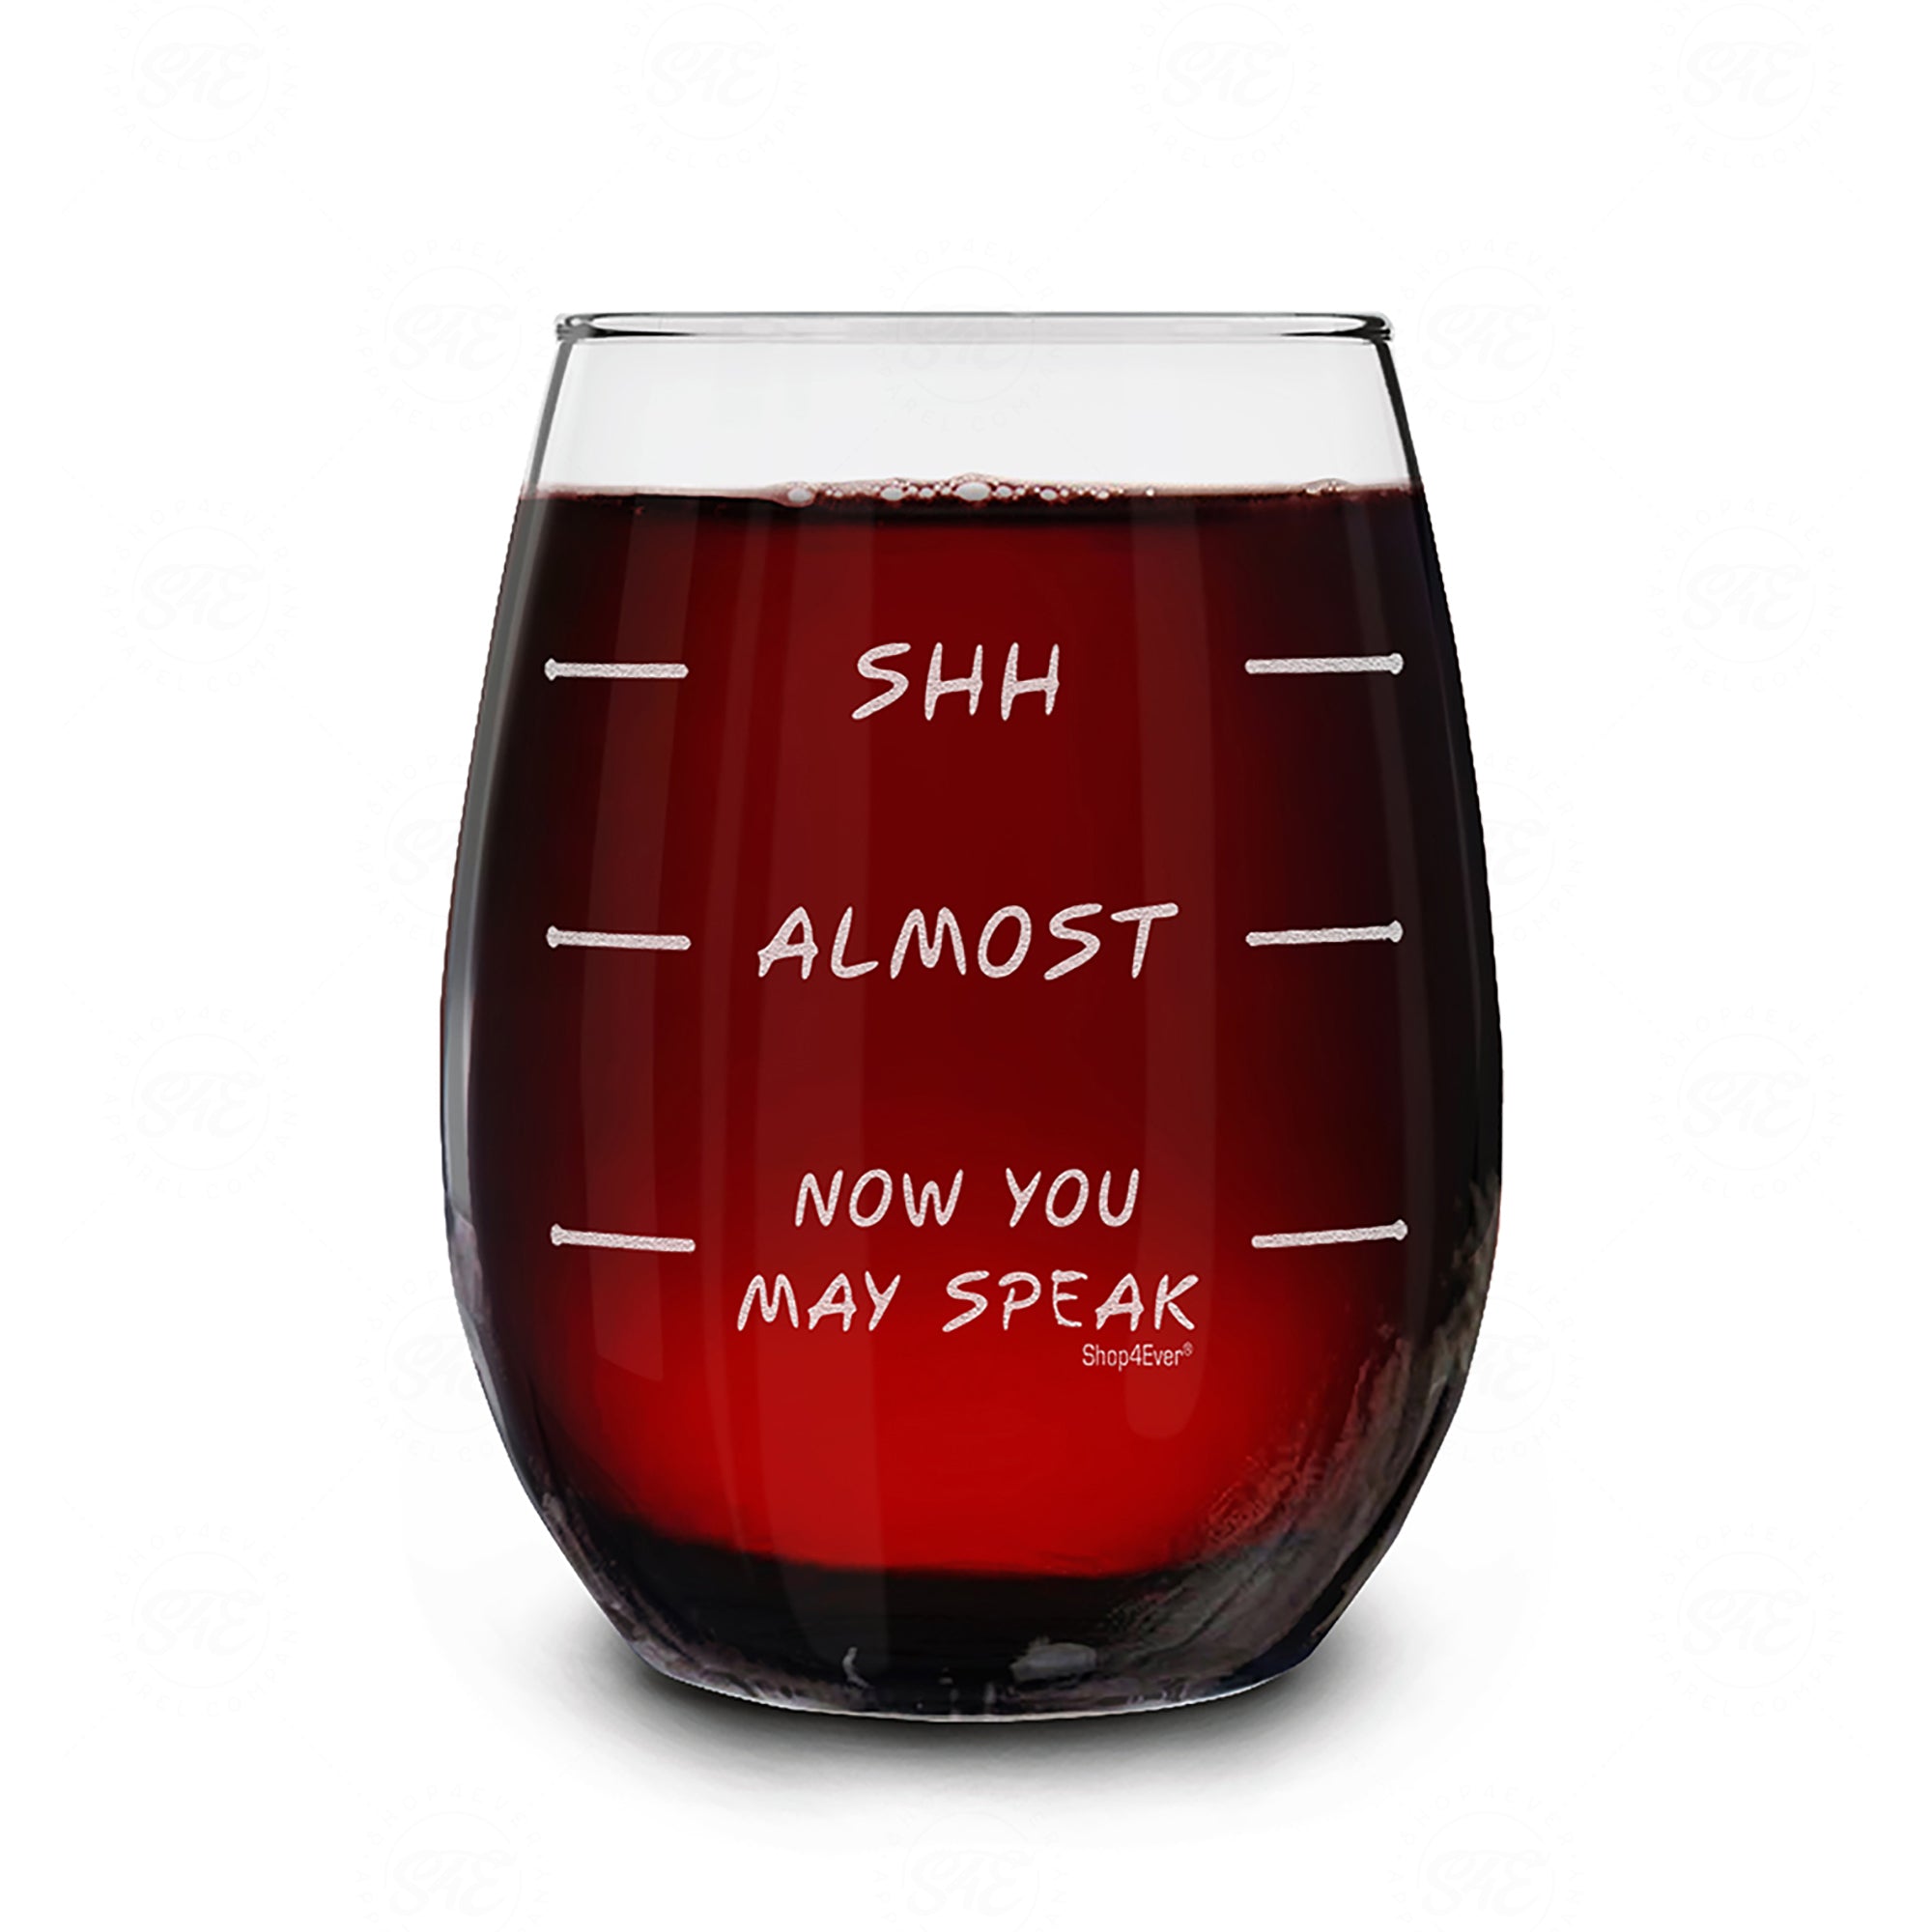 Shh - Almost - Now You May Speak Laser Engraved Stemless Wine Glass Funny Drinking Wine Glass for Mom Sister Bestfriend Coworker